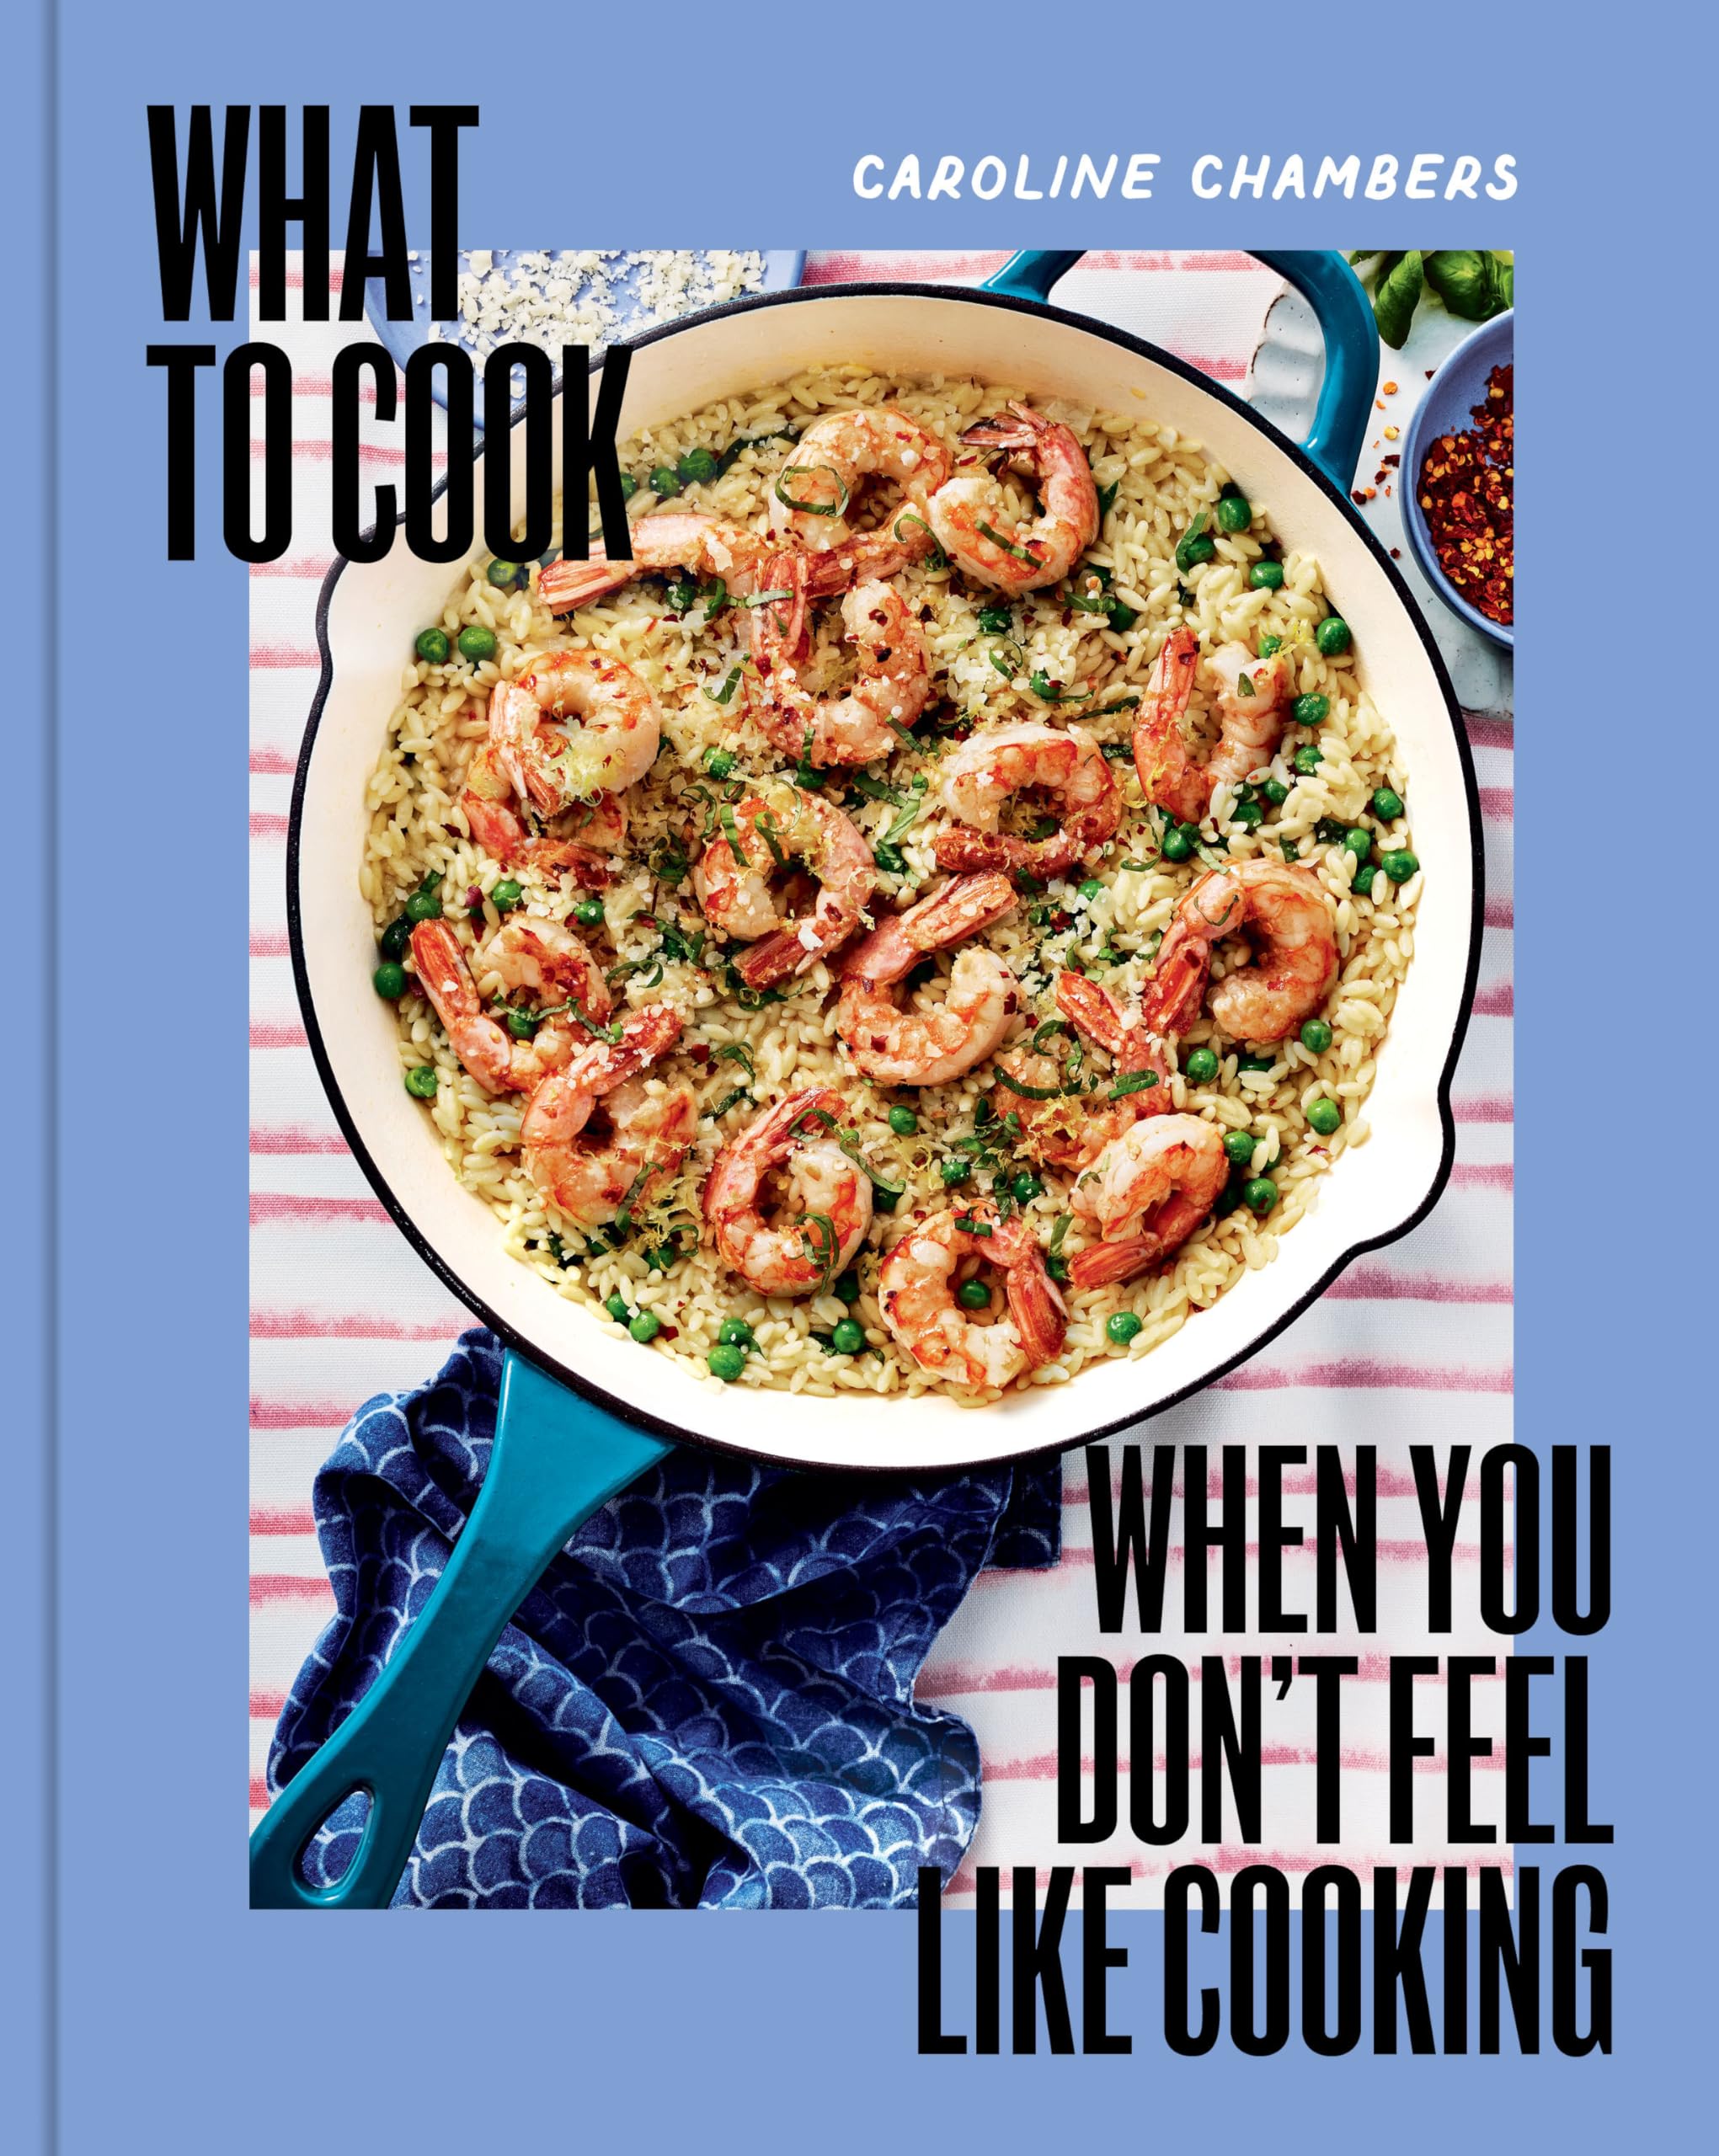 What to Cook When You Don't Feel Like Cooking - A Cookbook